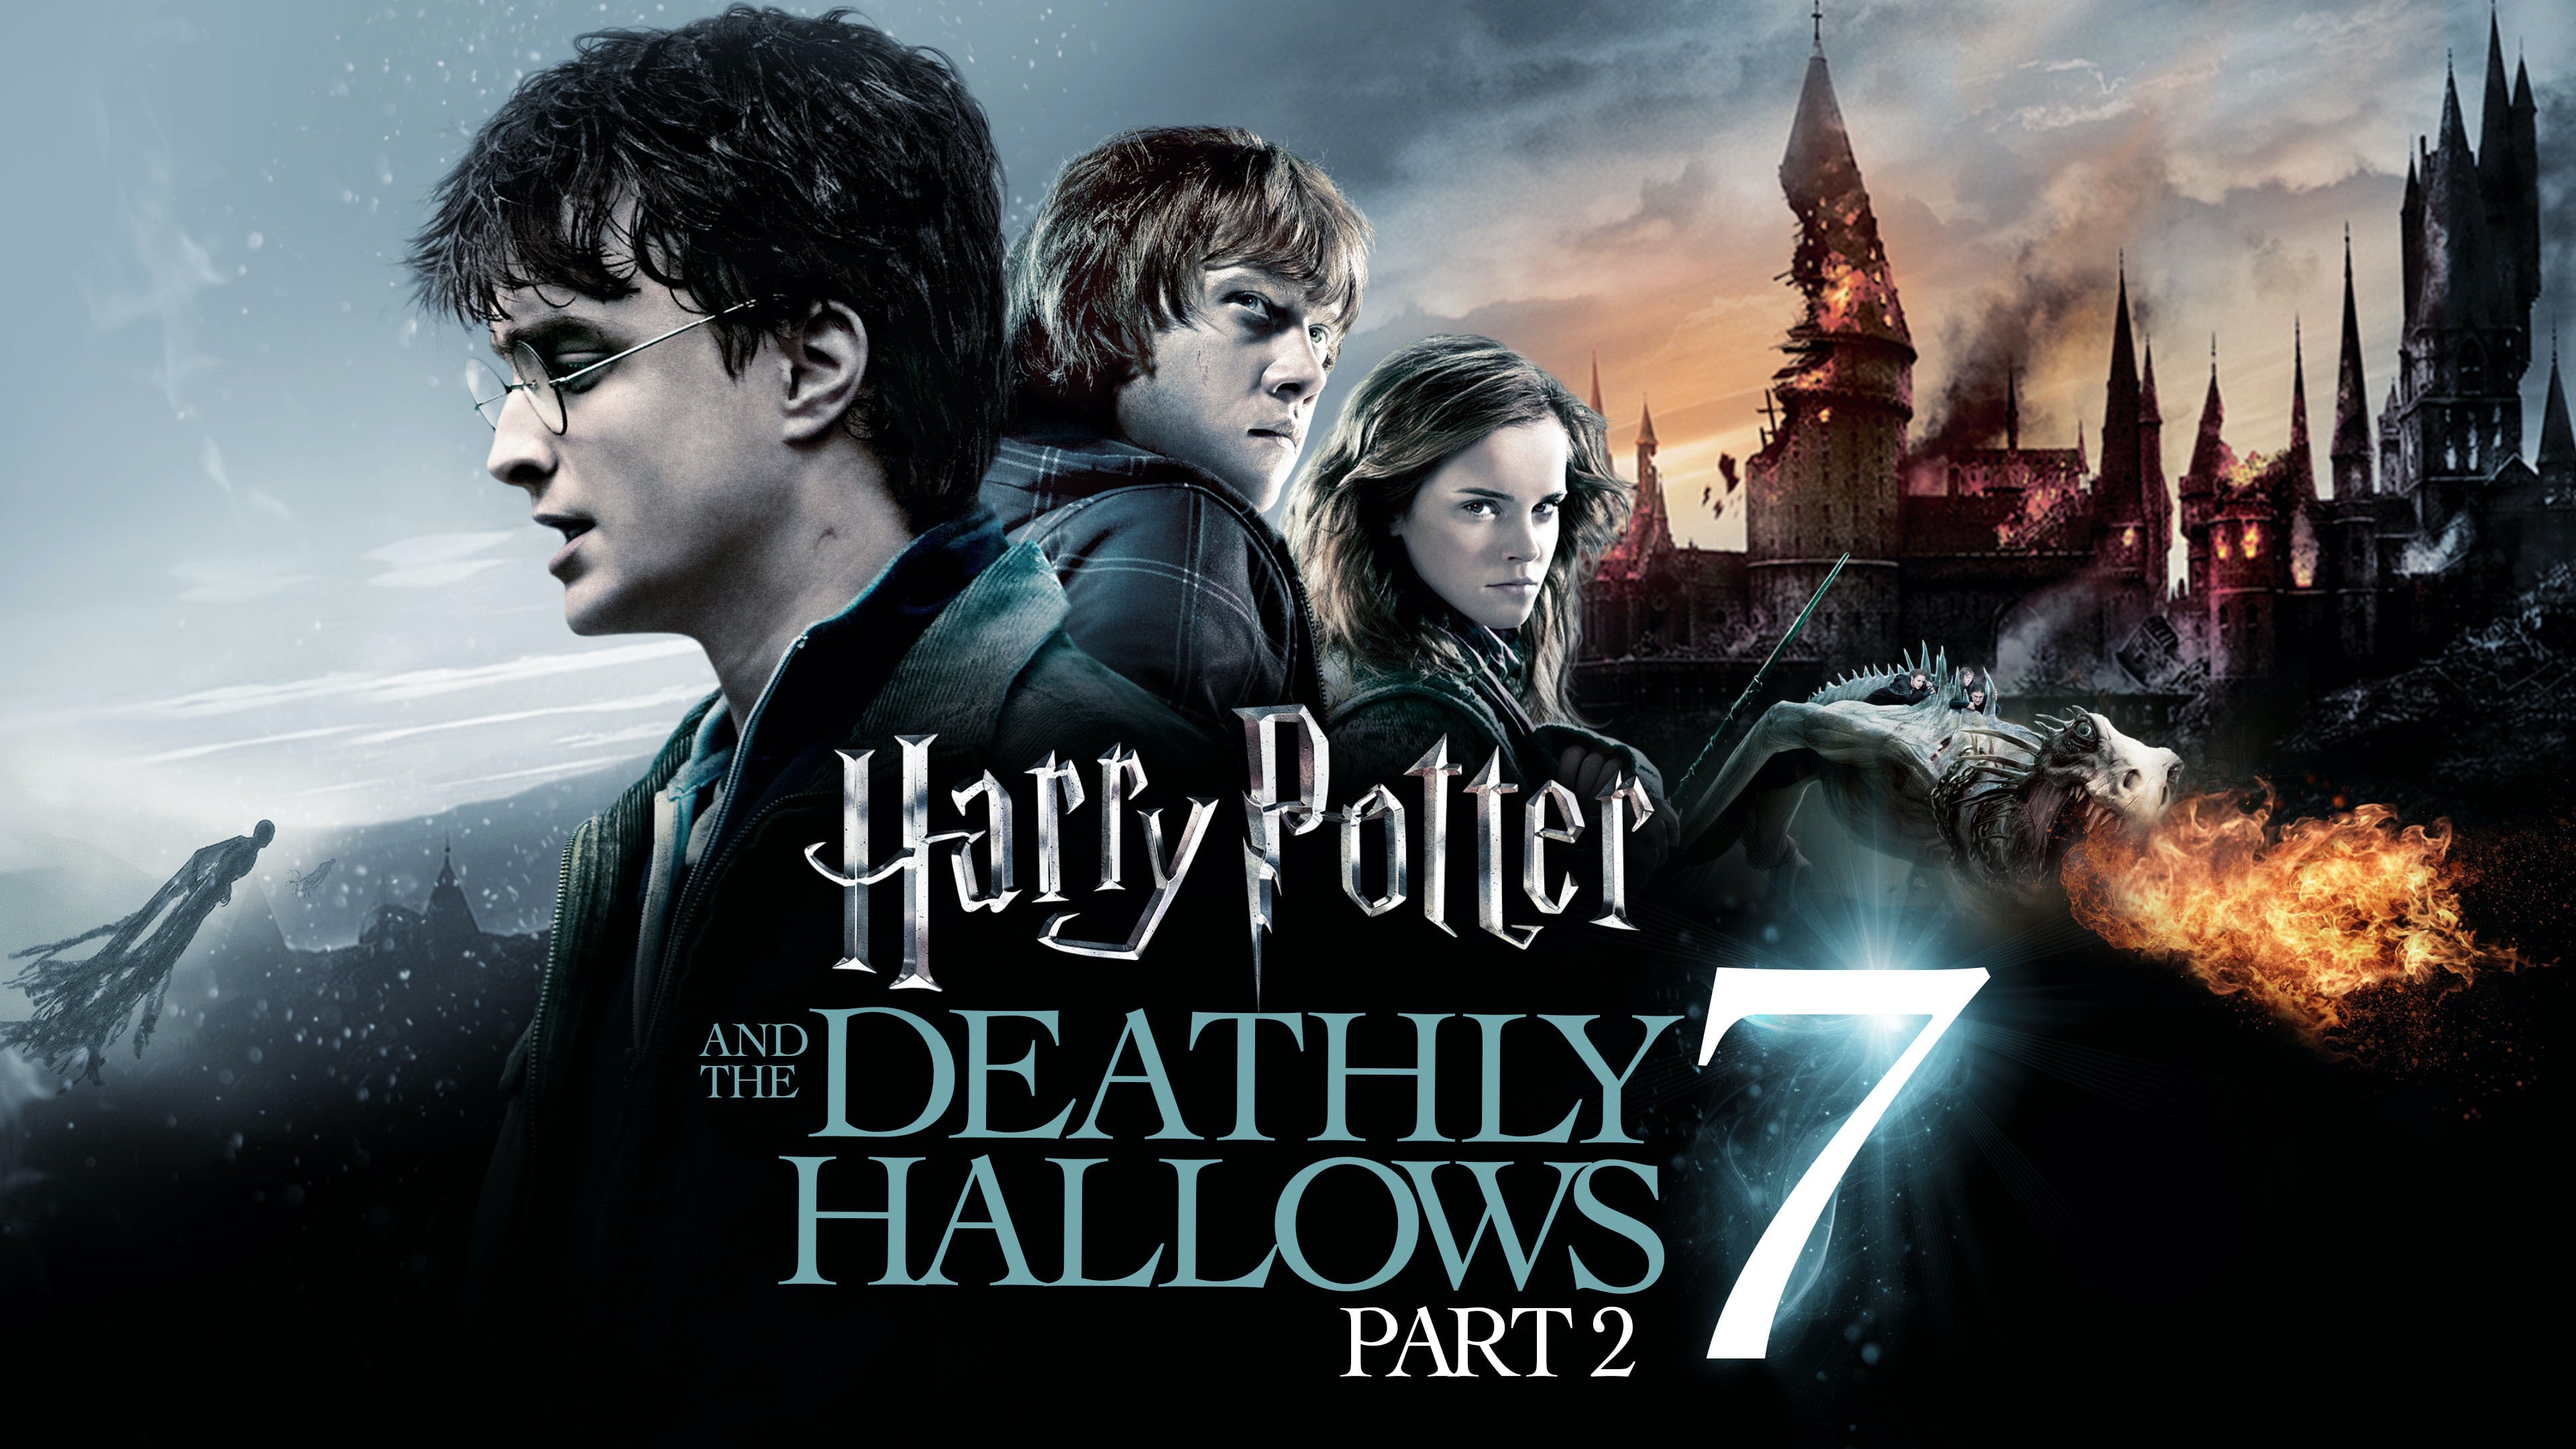 Harry Potter And The Deathly Hallows Part 4k Ultra HD Wallpaper